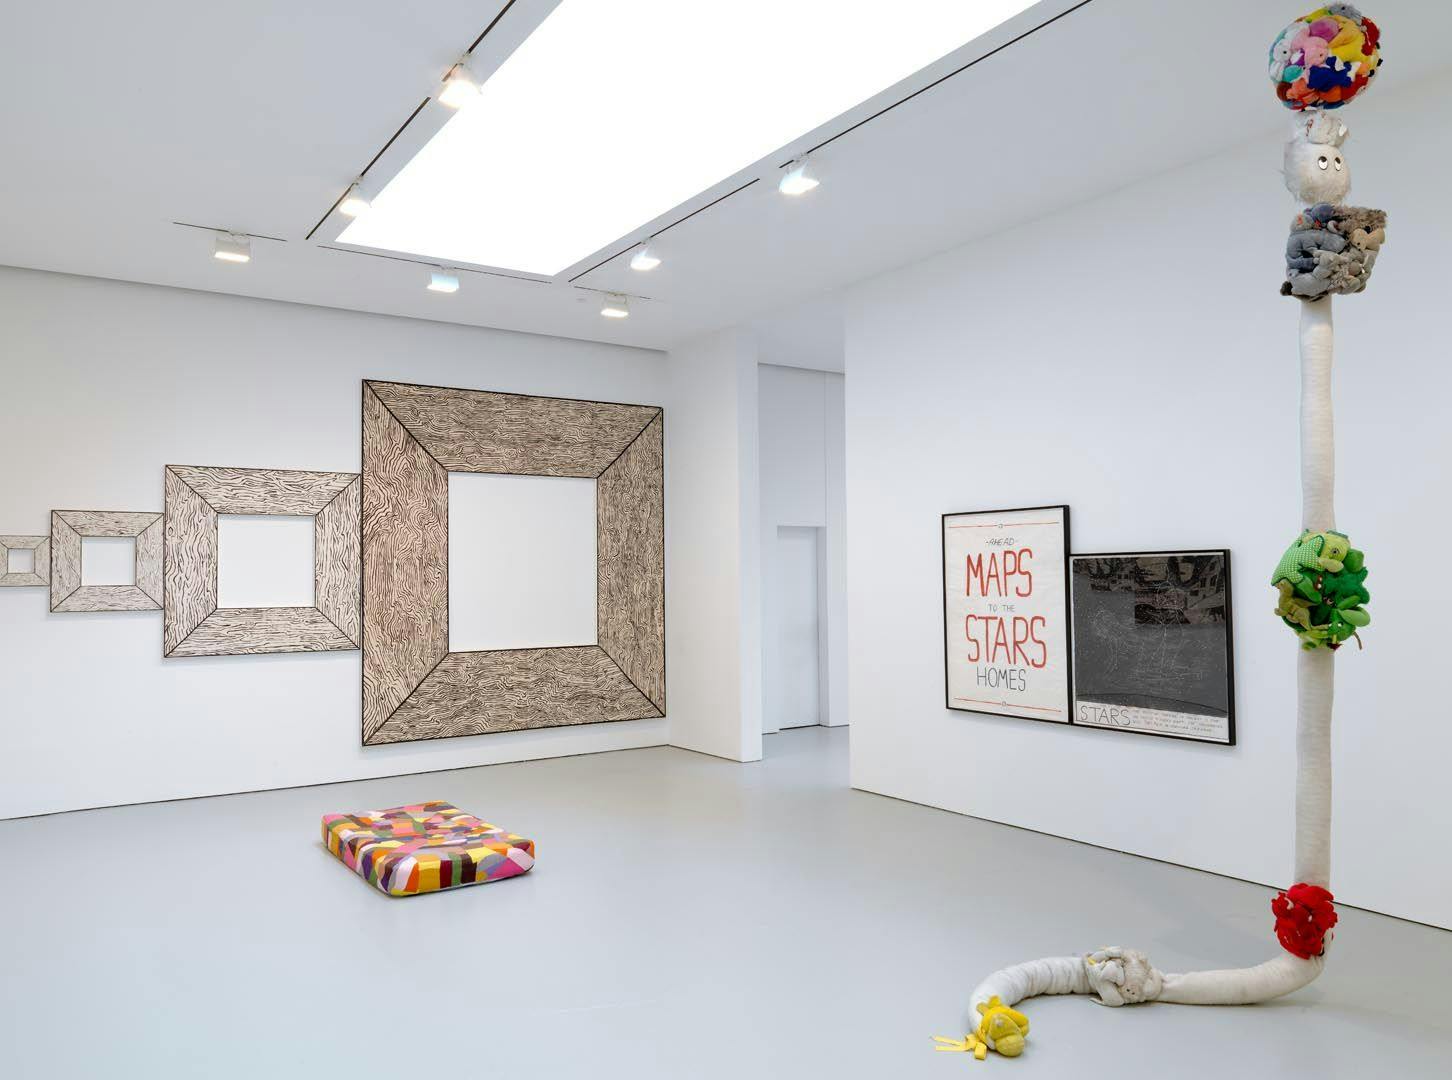 "An installation view of the exhibition No Problem: Cologne/New York1984-1989, at David Zwirner New York, dated 2014."